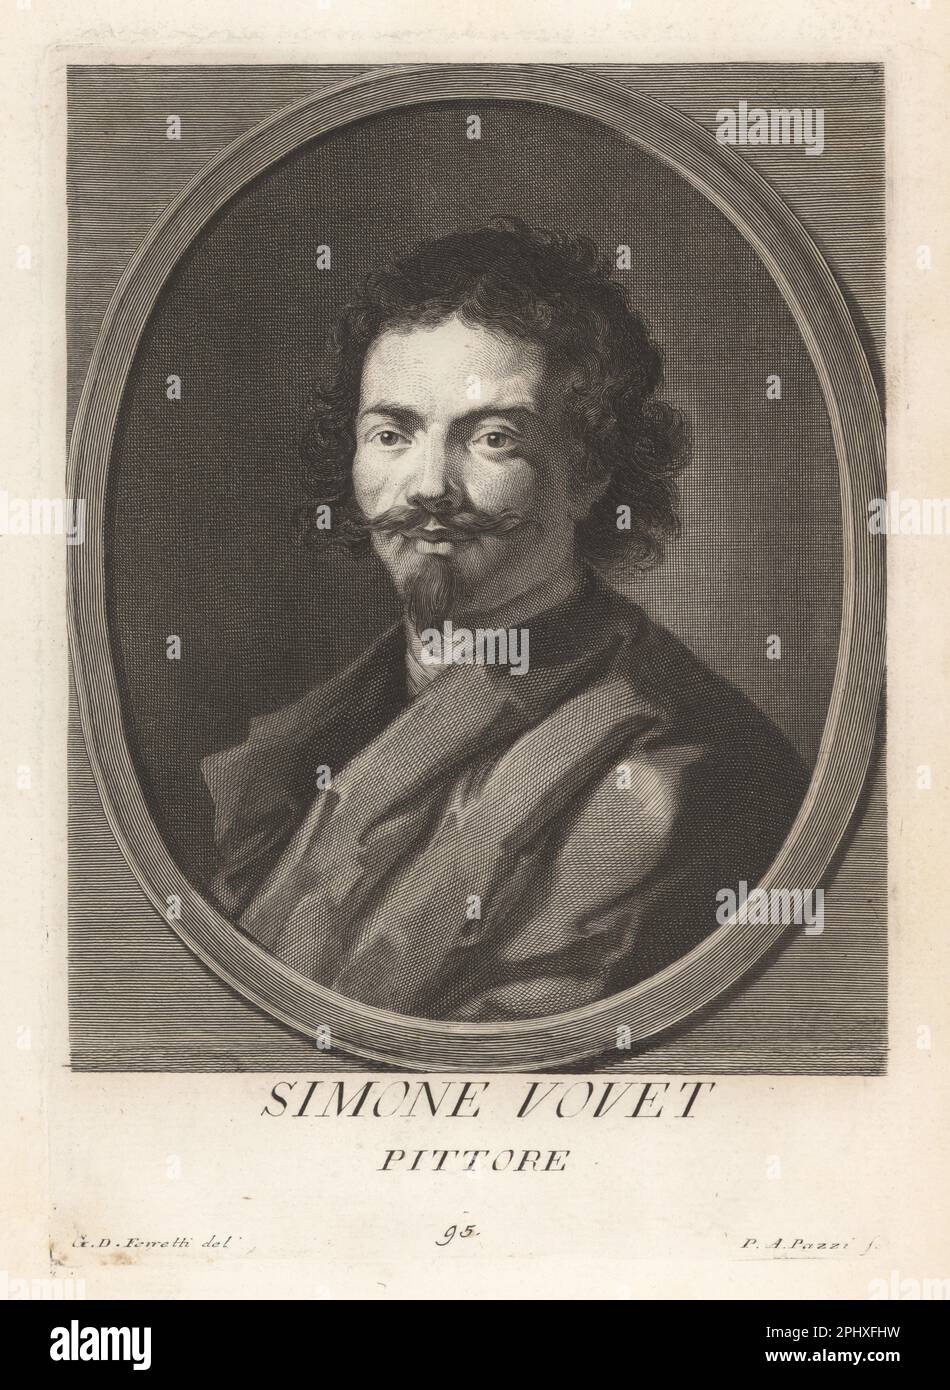 Simon Vouet, French historical painter, 1590-1649. Studied and rose to prominence in Rome, Italy, before being hired by King Louis XIII as Premier peintre du Roi in France. Simone Vouet, Pittore. Copperplate engraving by Pietro Antonio Pazzi after Giovanni Domenico Campiglia after a self portrait by the artist from Francesco Moucke's Museo Florentino (Museum Florentinum), Serie di Ritratti de Pittori (Series of Portraits of Painters) stamperia Mouckiana, Florence, 1752-62. Stock Photo